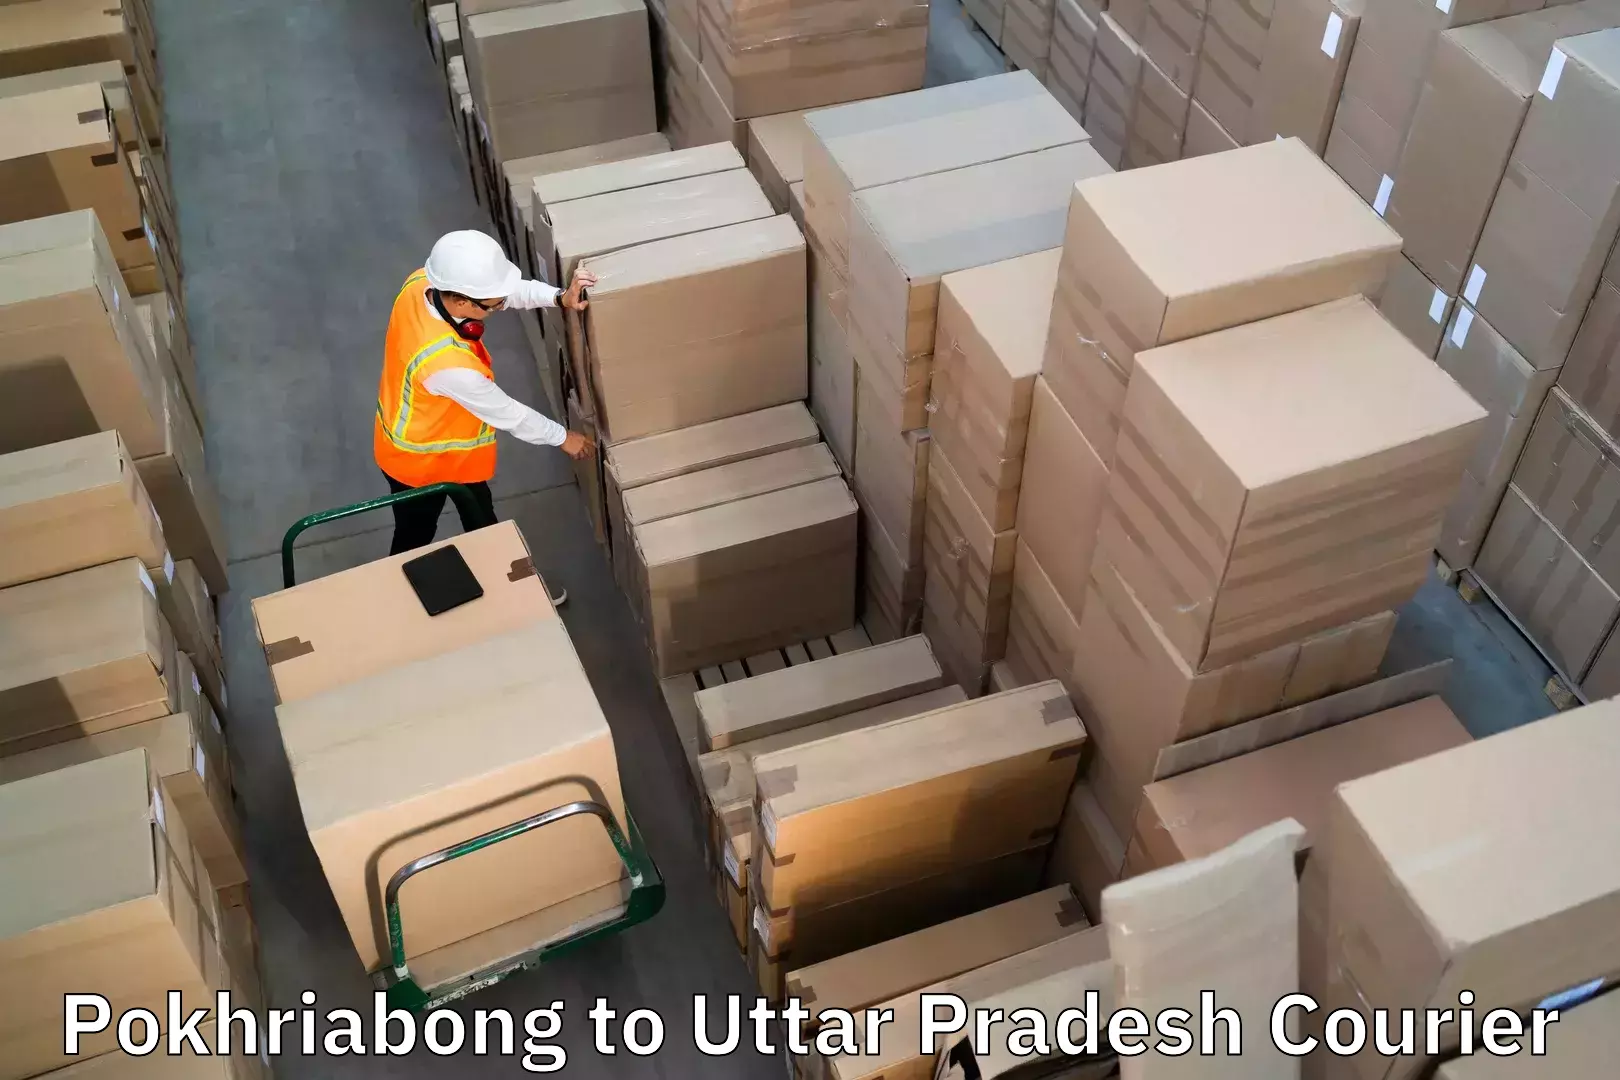 Baggage relocation service Pokhriabong to Gauriganj